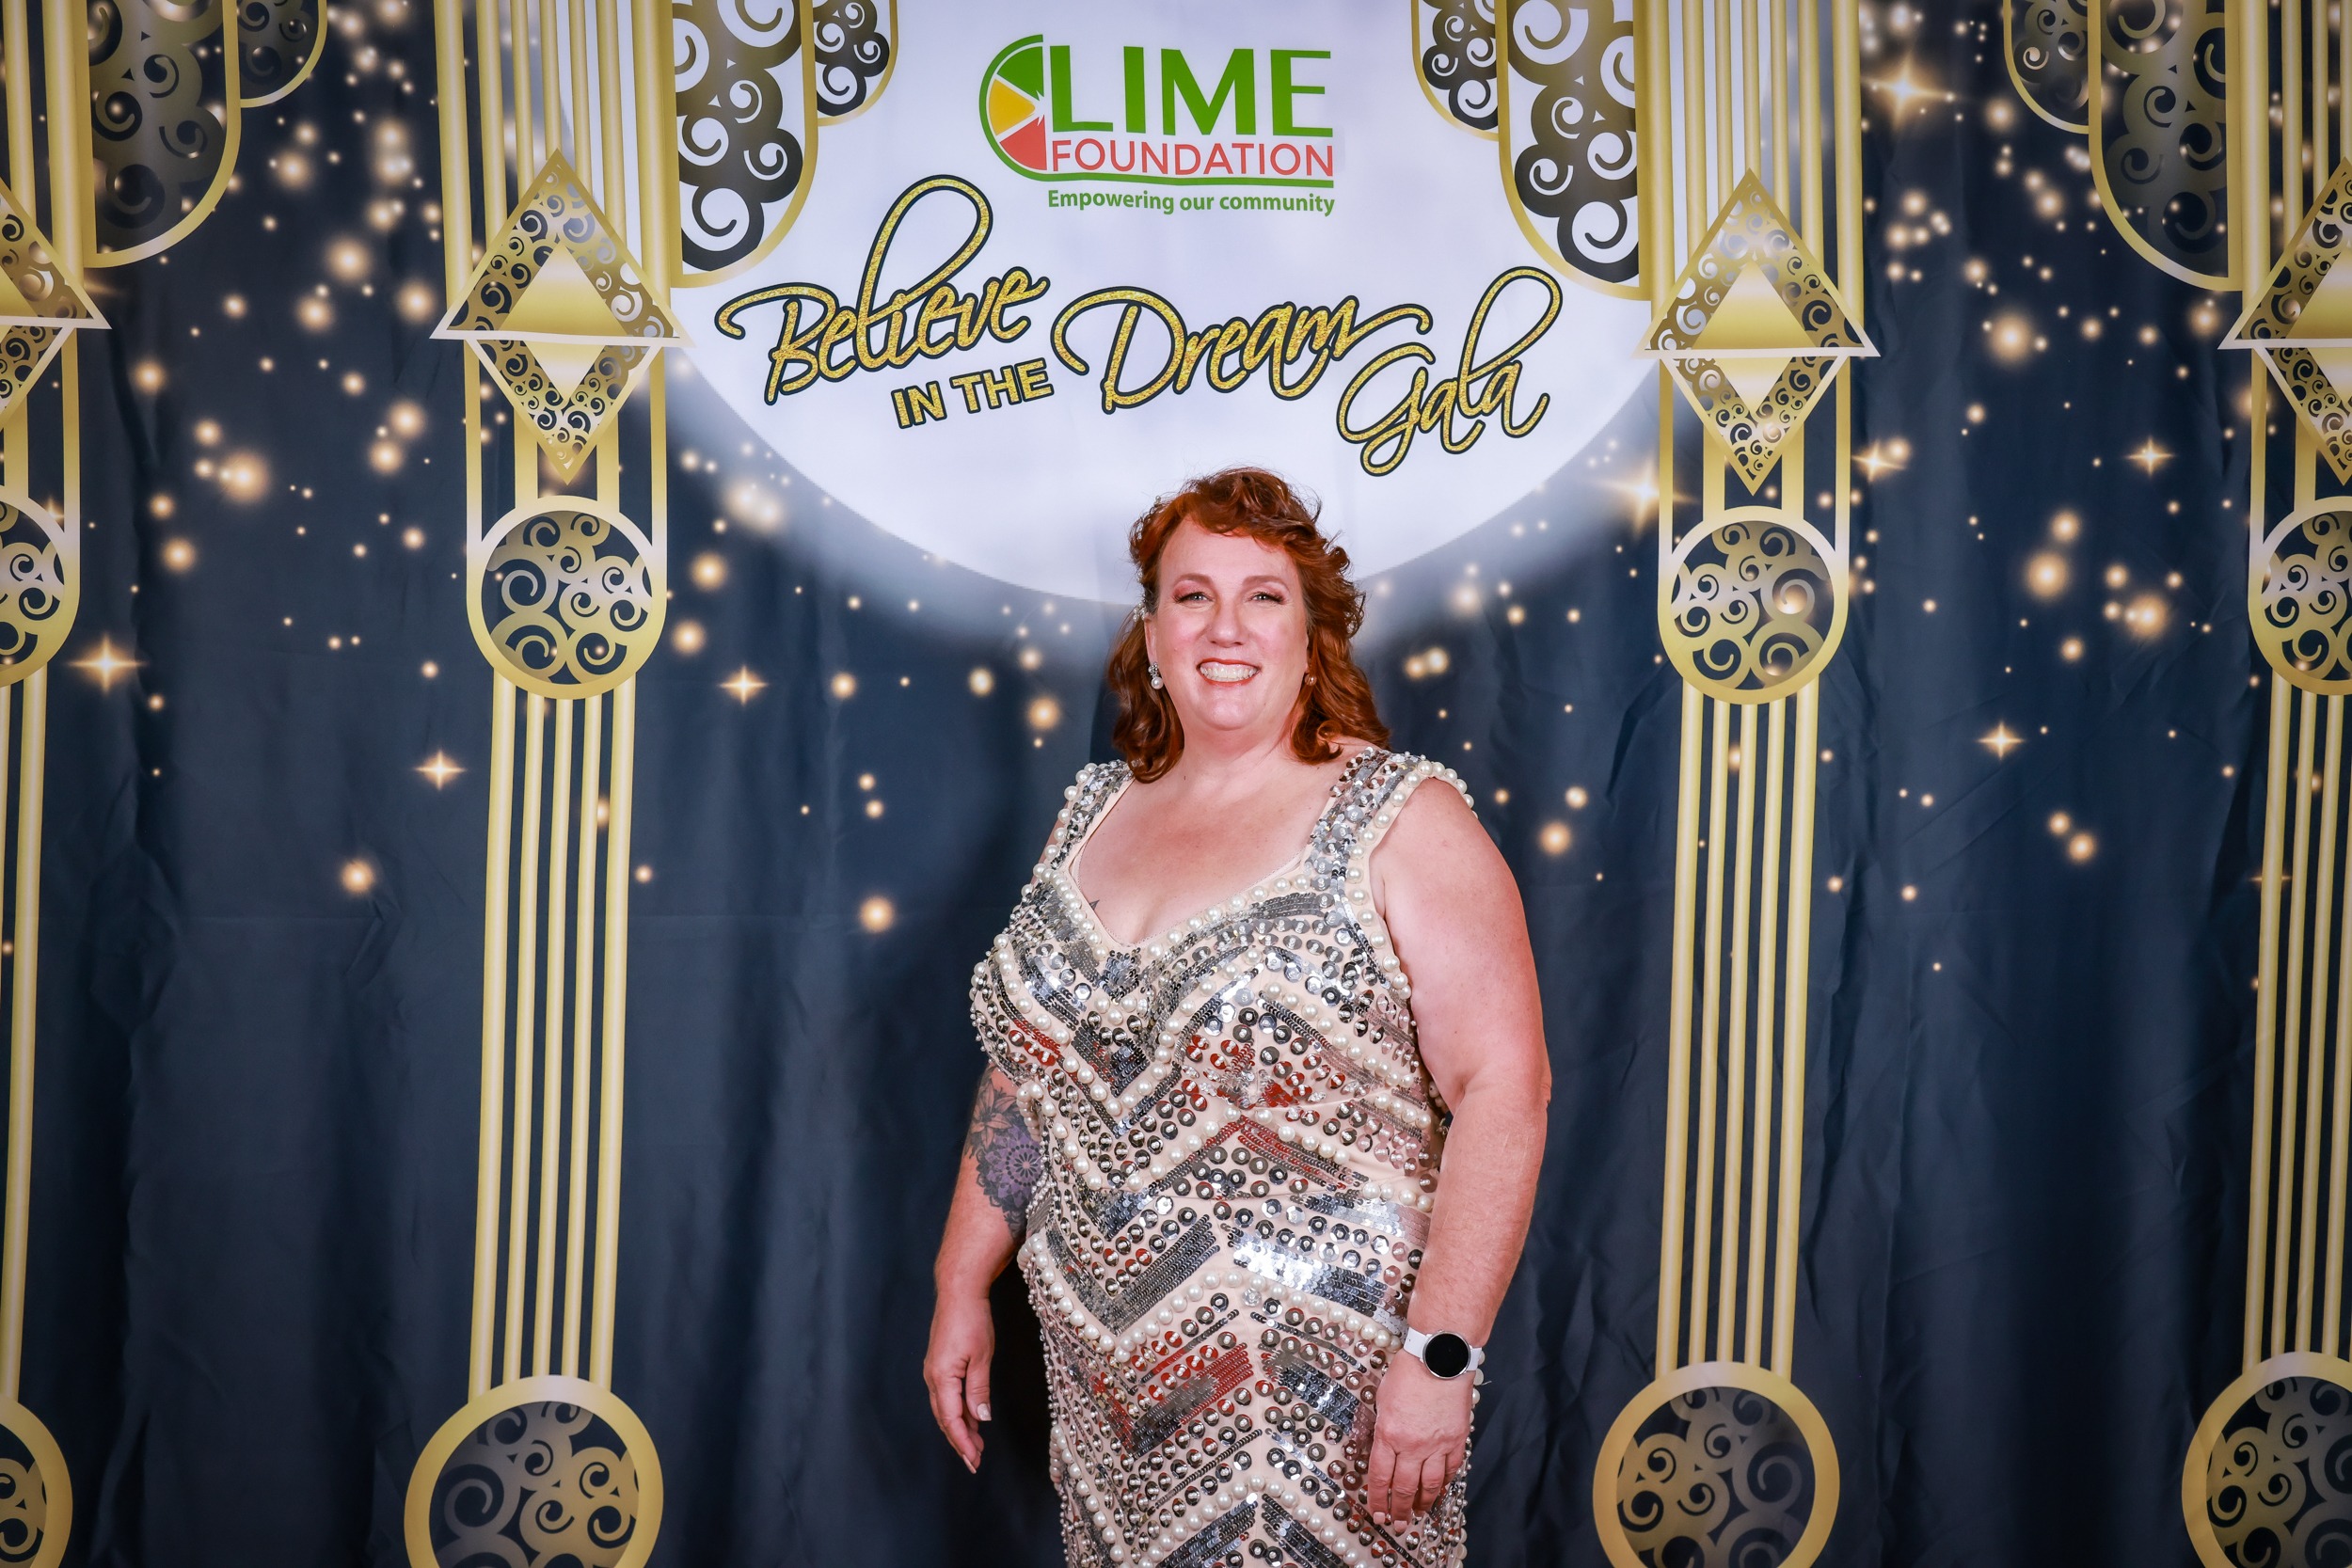 A woman in a sequin dress standing in front of a backdrop at The LIME Foundation of Santa Rosa.